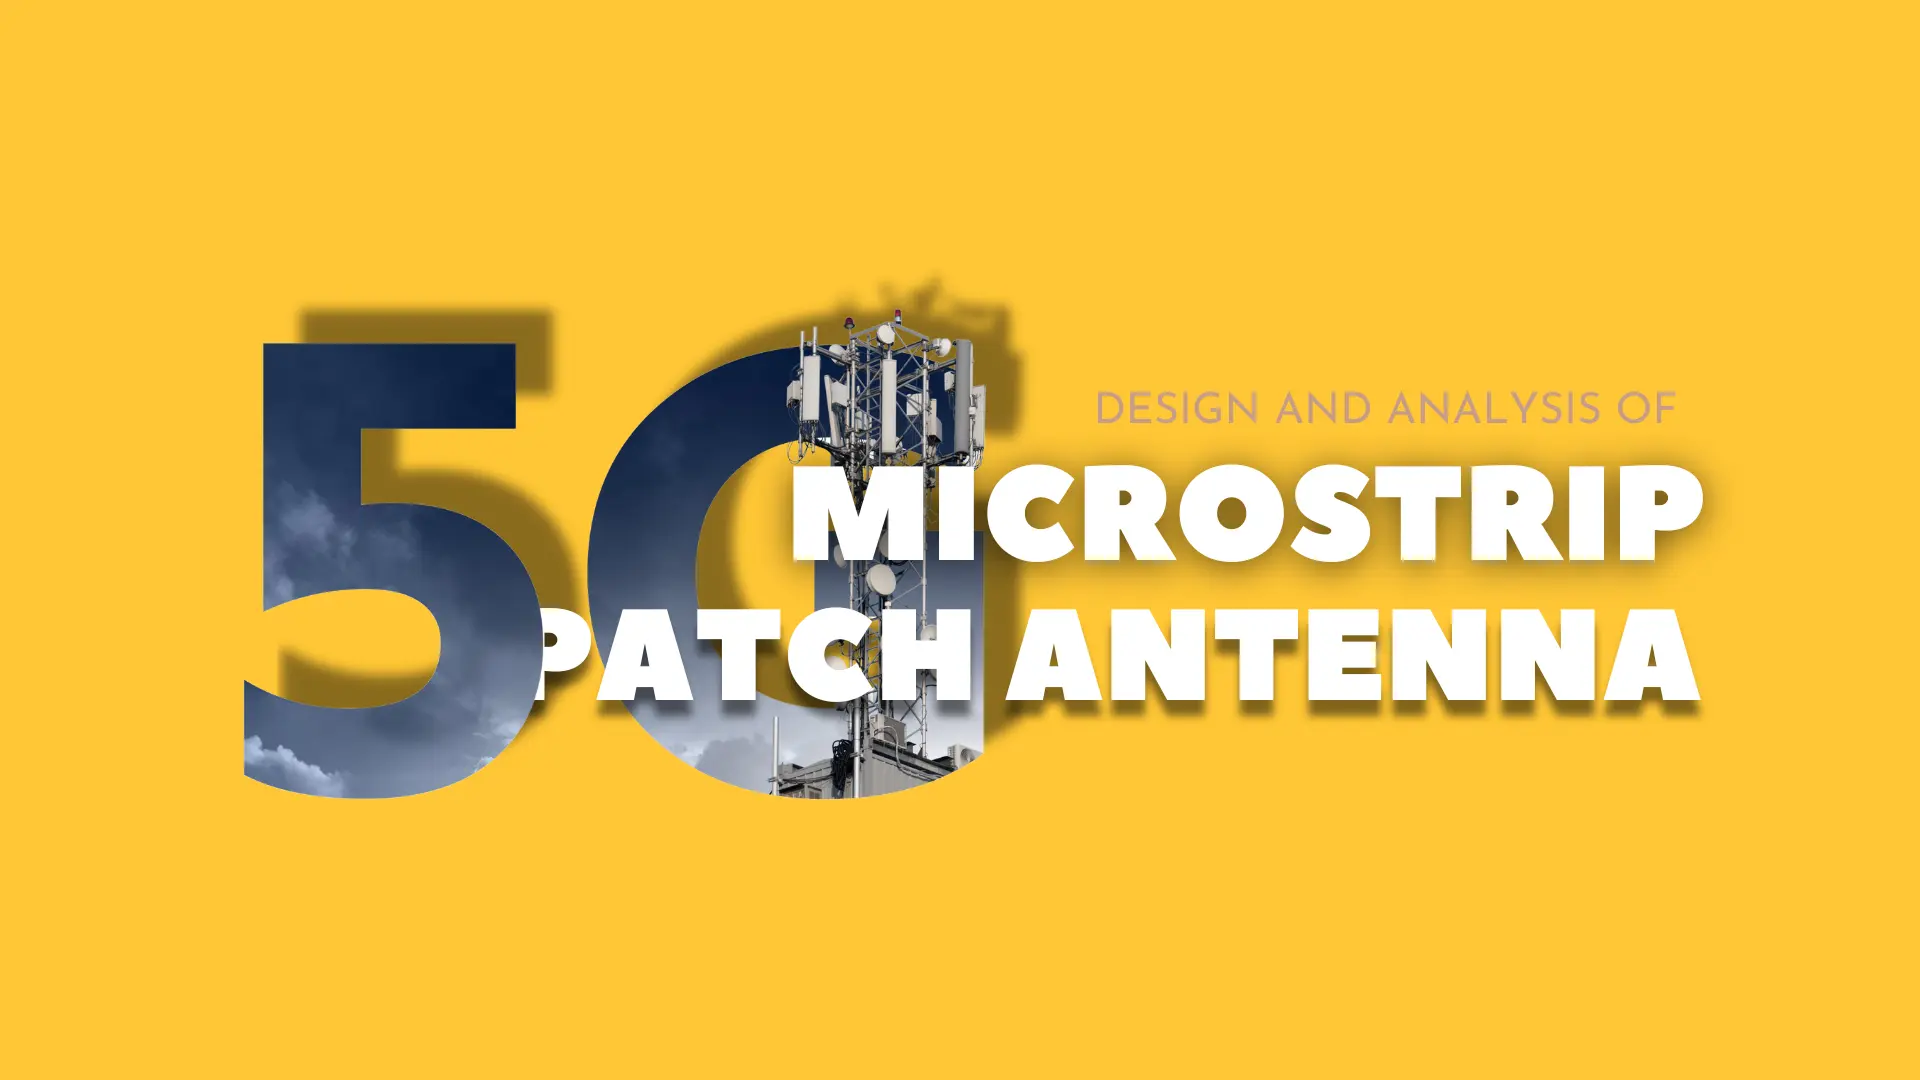 Microstrip patch antenna for 5G wireless communication